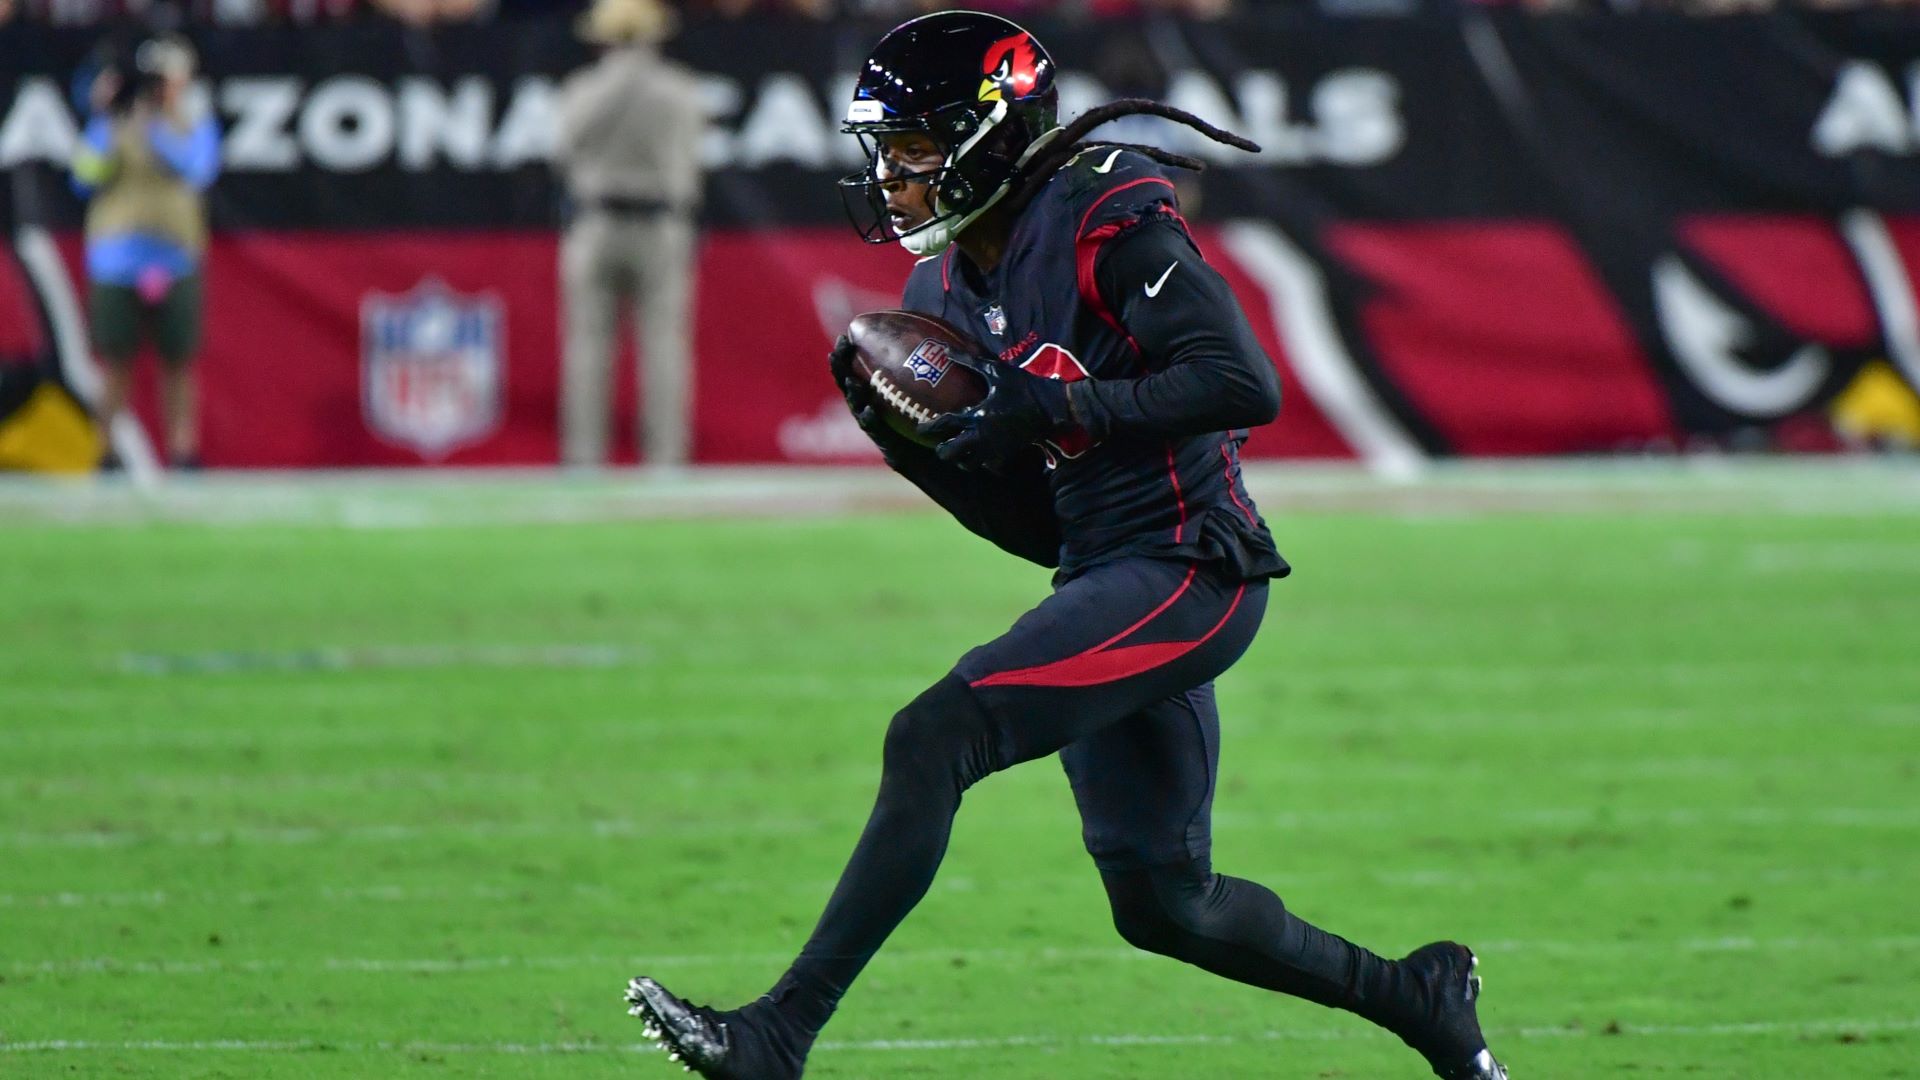 DeAndre Hopkins in no rush to sign; Patriots 'remain high' on WR